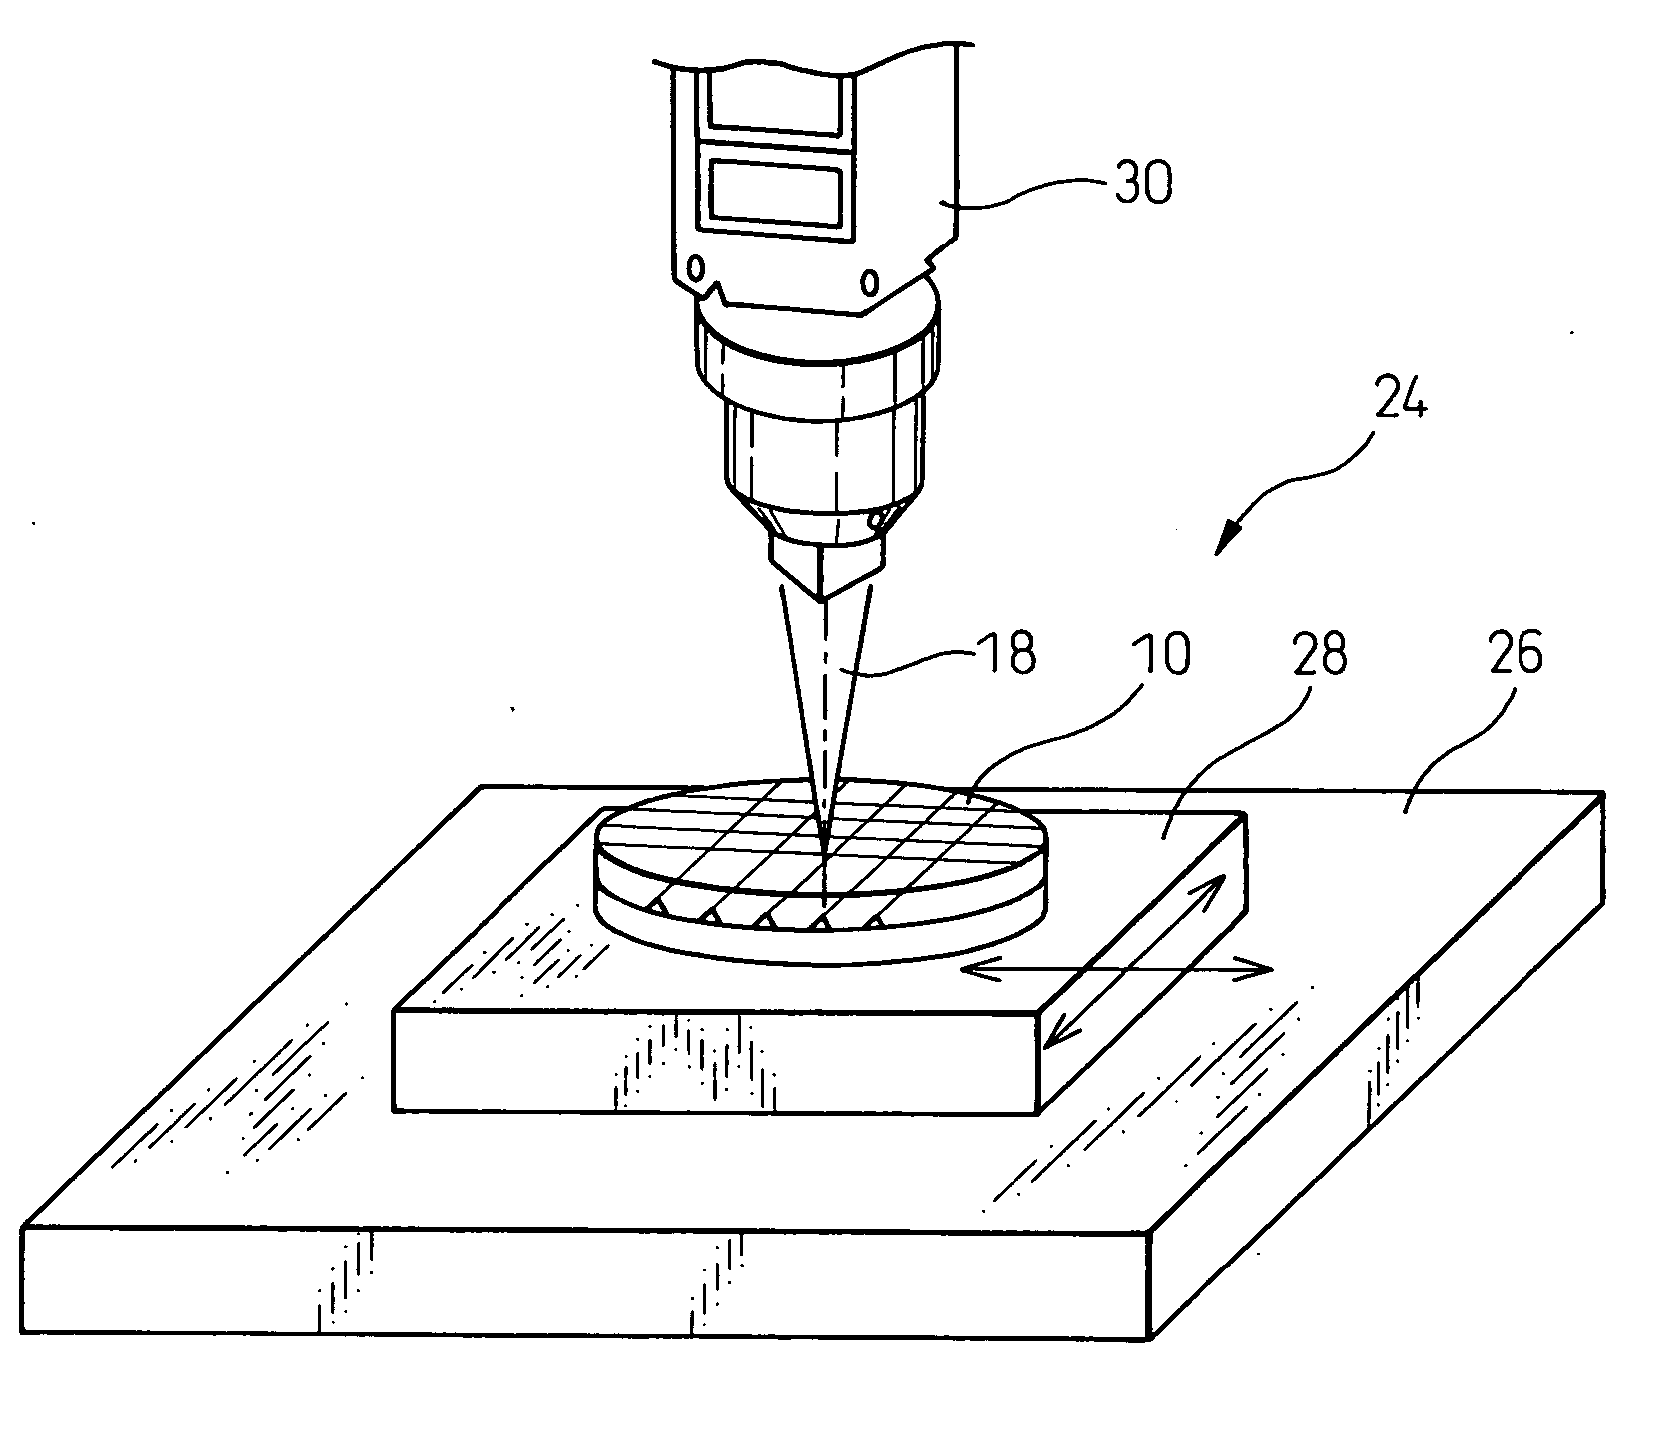 Method of cutting laminate with laser and laminate